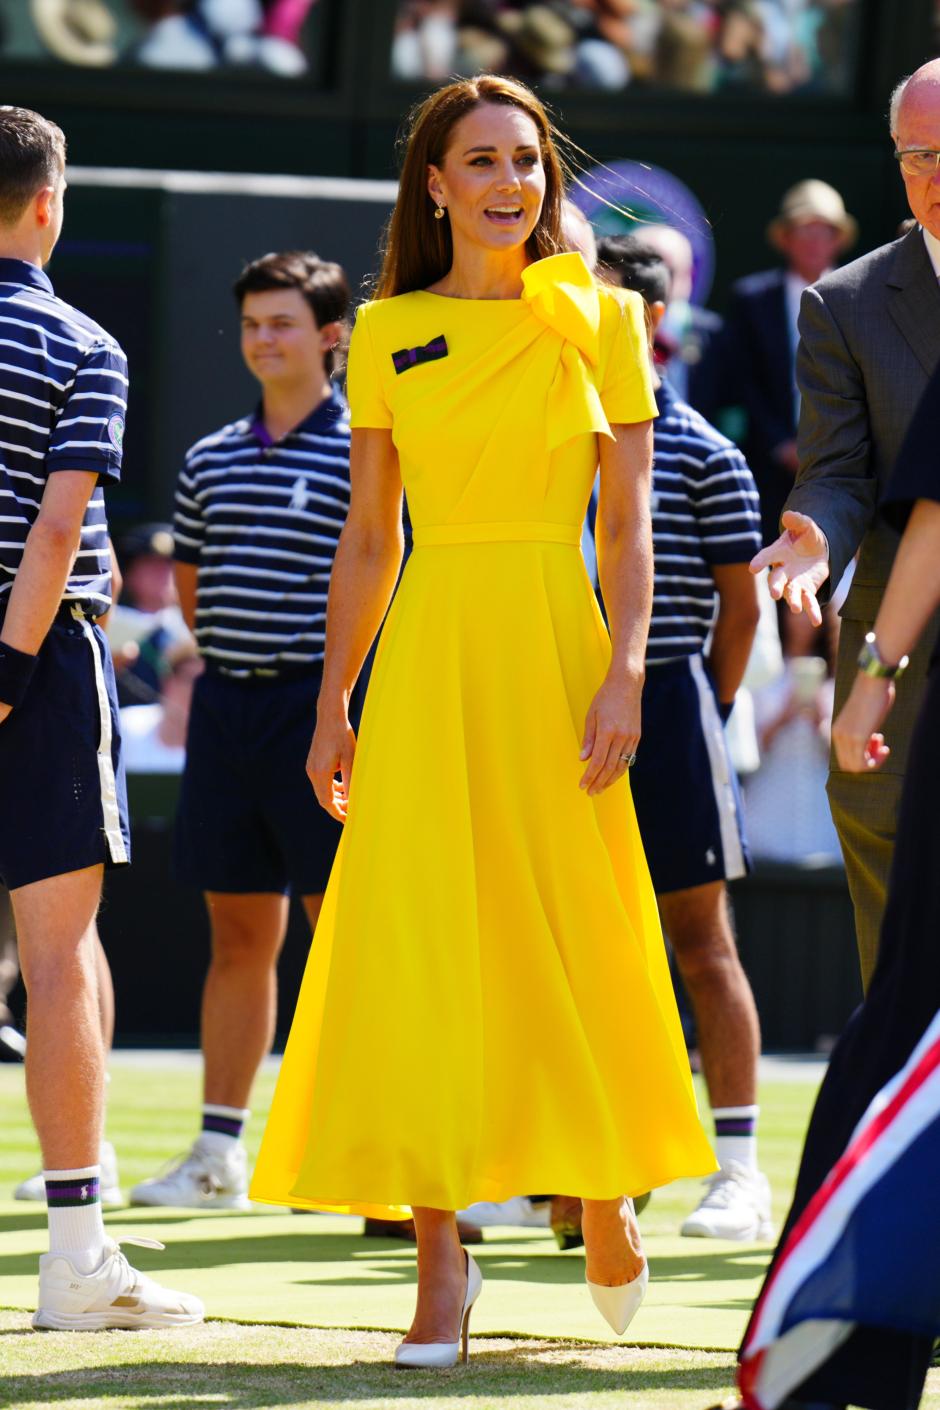 Catherine Princess of Wales in the Royal Box
Wimbledon Tennis Championships, Day 2, The All England Lawn Tennis and Croquet Club, London, UK - 04 Jul 2023
Wearing Balmain